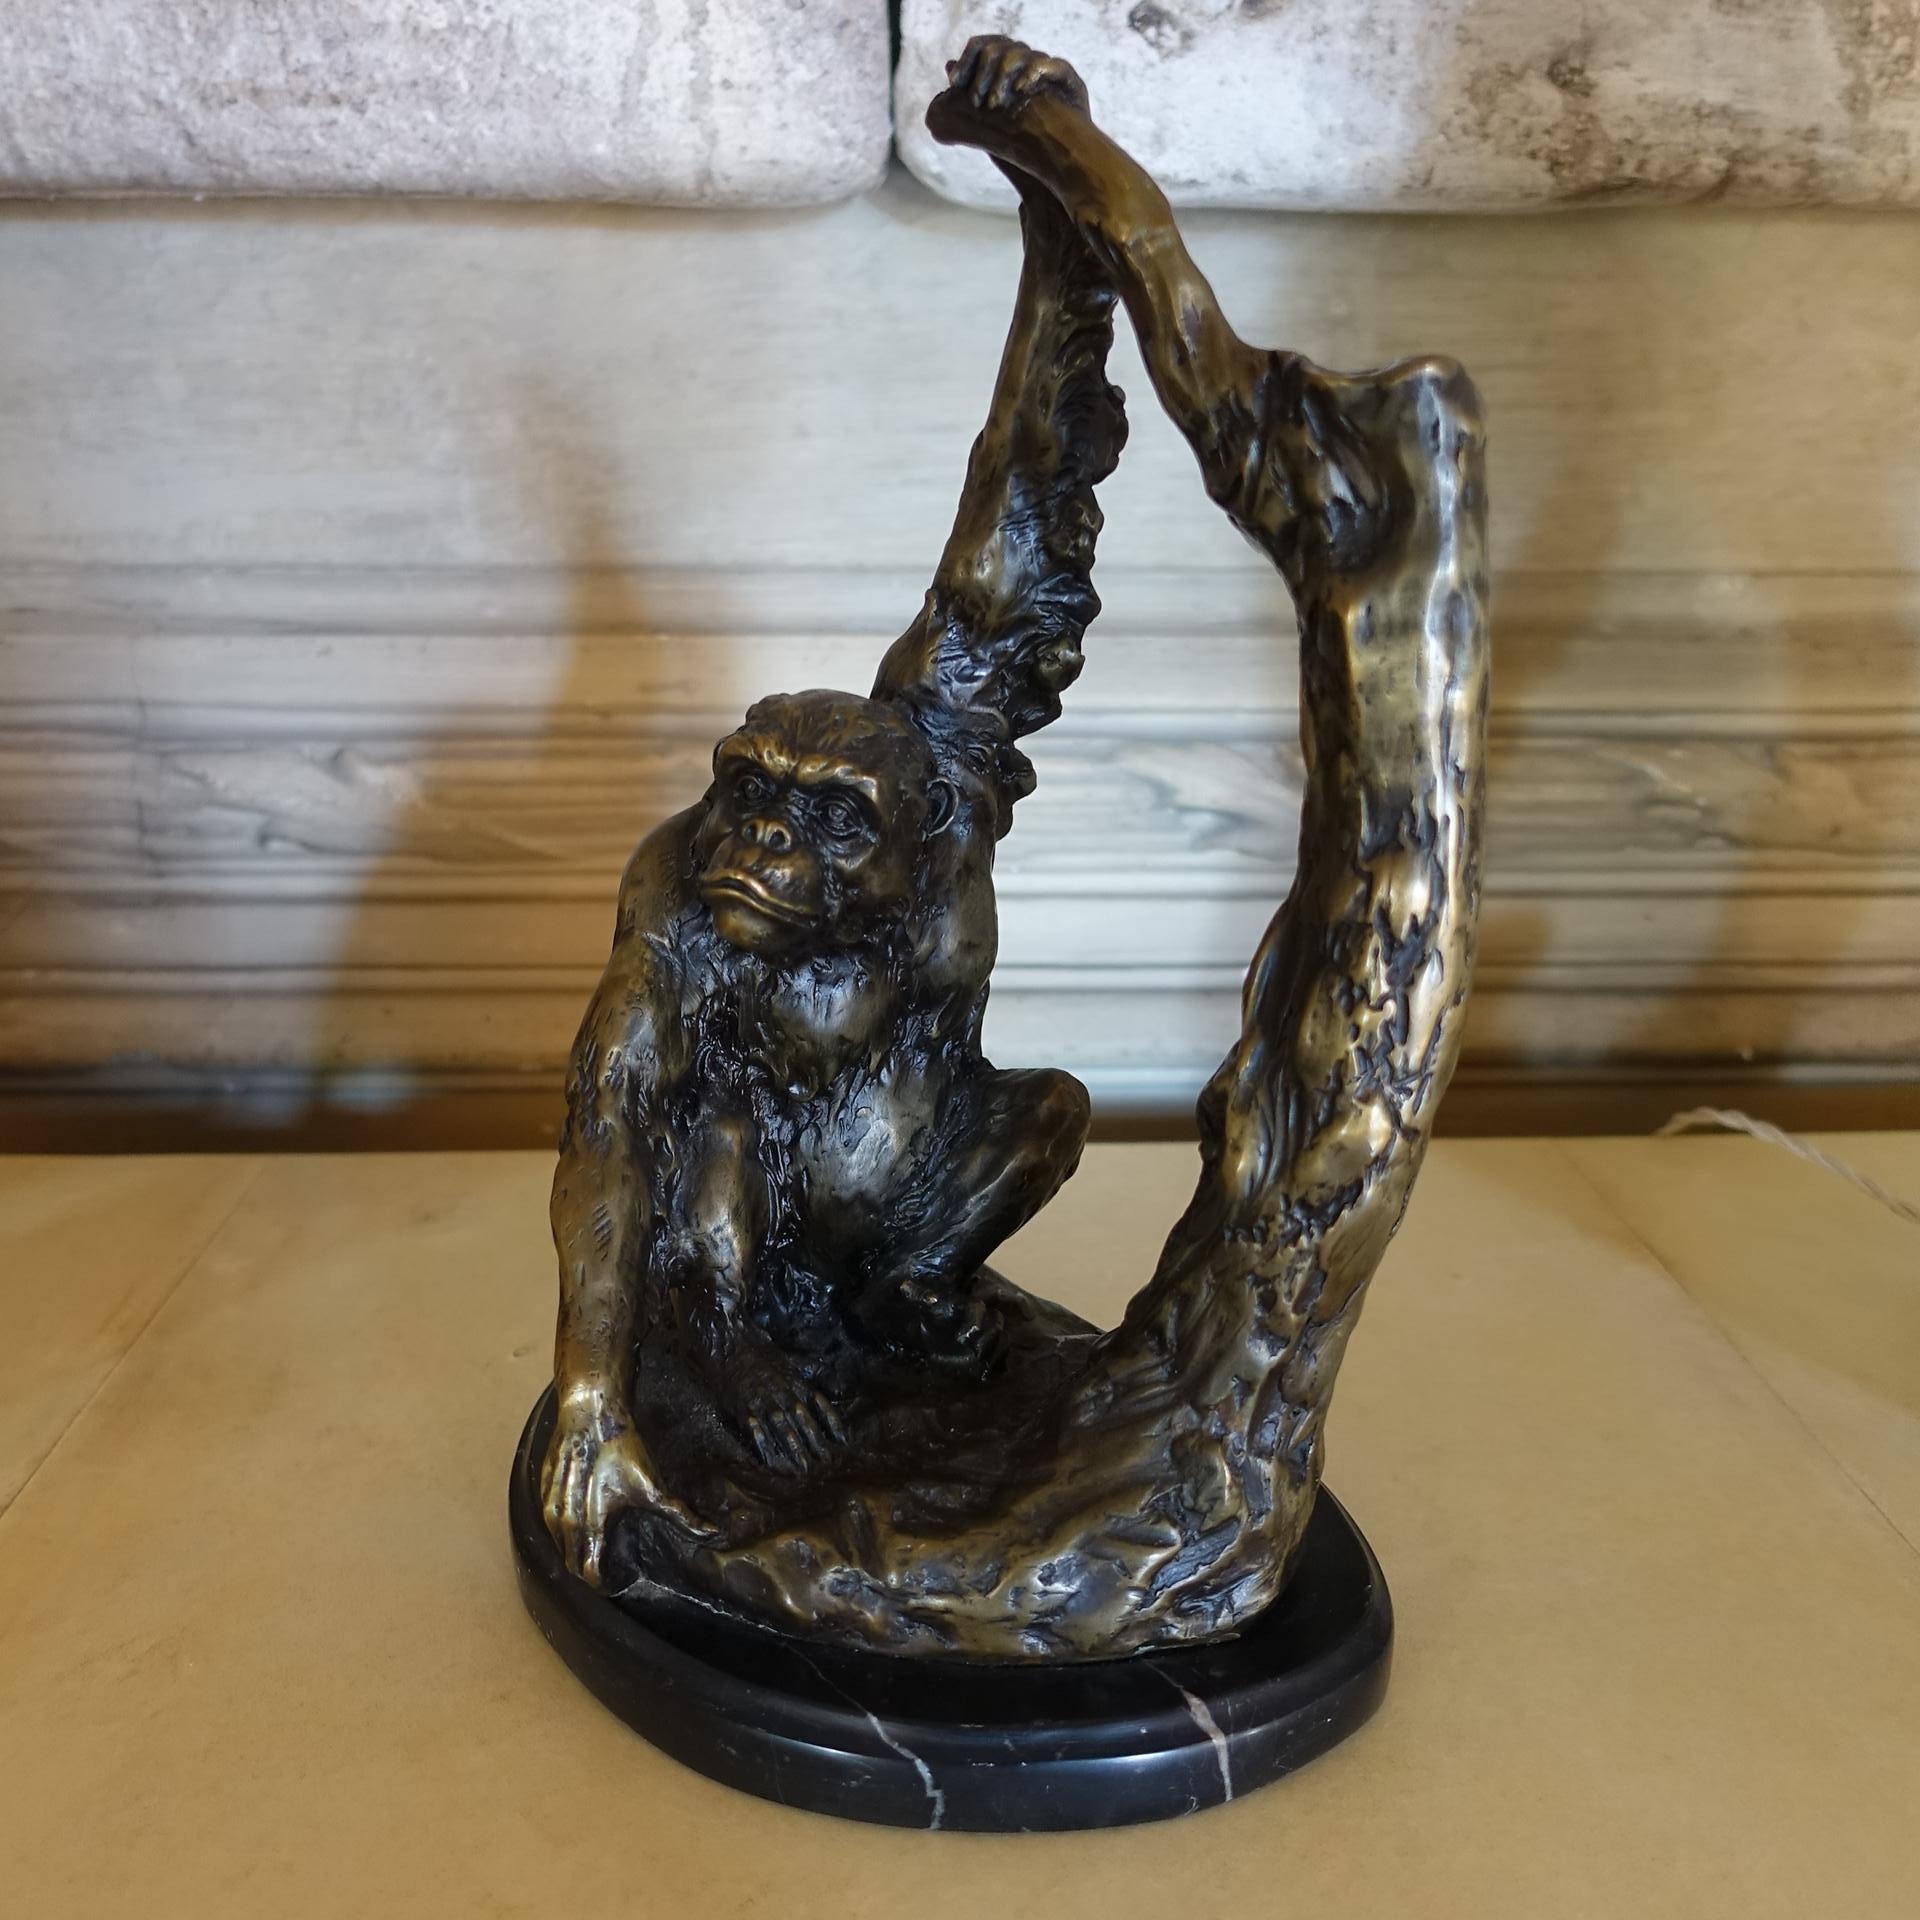 1970s monkey bronze sculpture on black marquinia marble base, perfect condition and vintage patina.